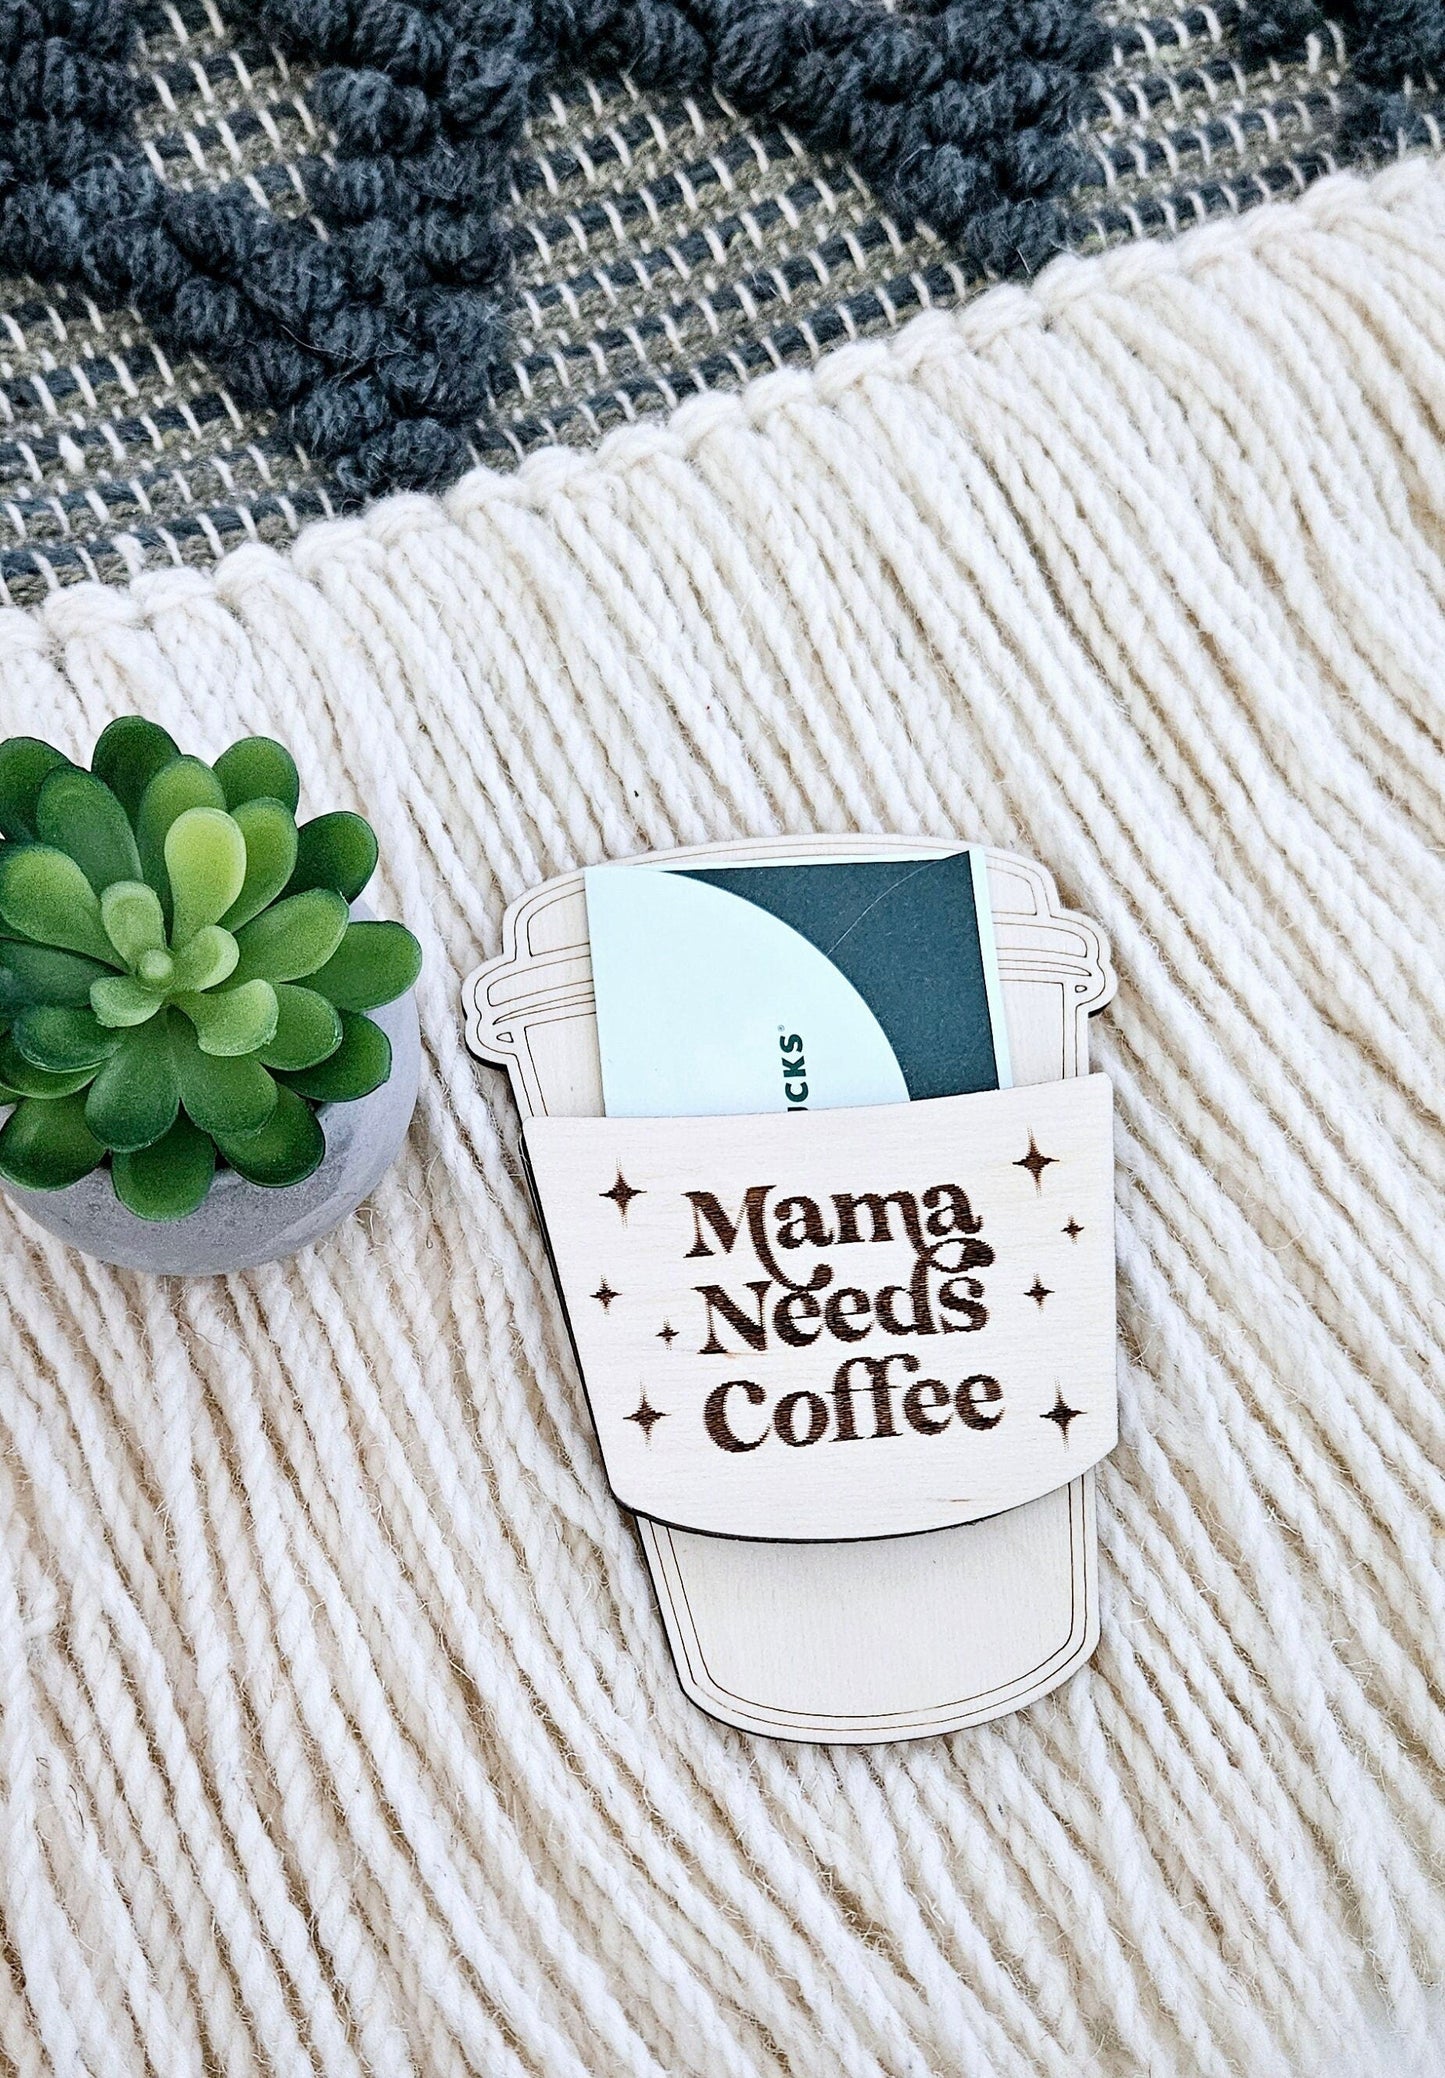 Mothers Day Gift Card Holder